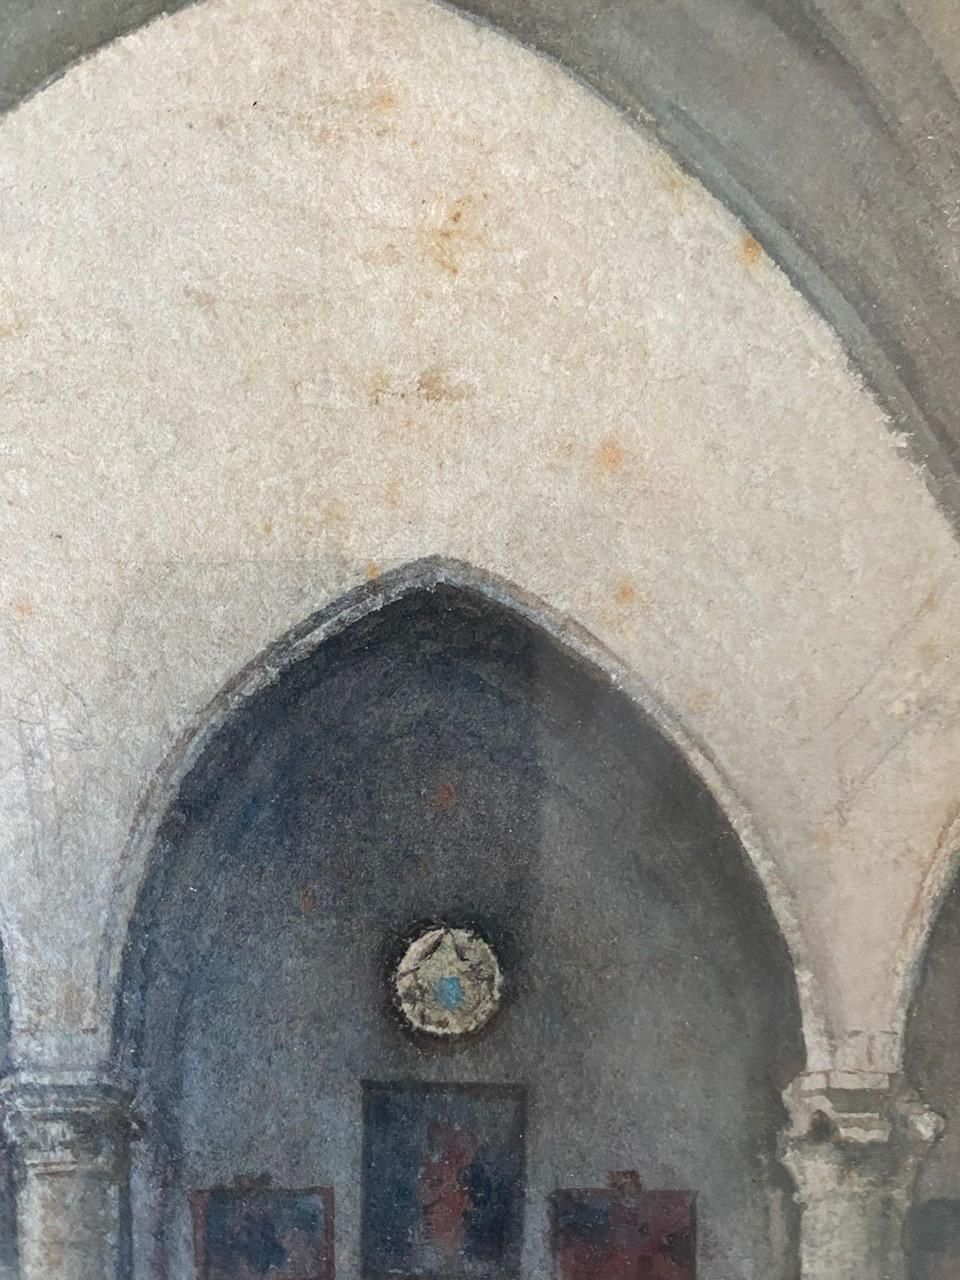 This watercolor represents the interior of a church. We can see different columns and pointed arches. We can see hanging on the opposites aisle different paintings. An altar is visible on the left side. 

This watercolor was created by the